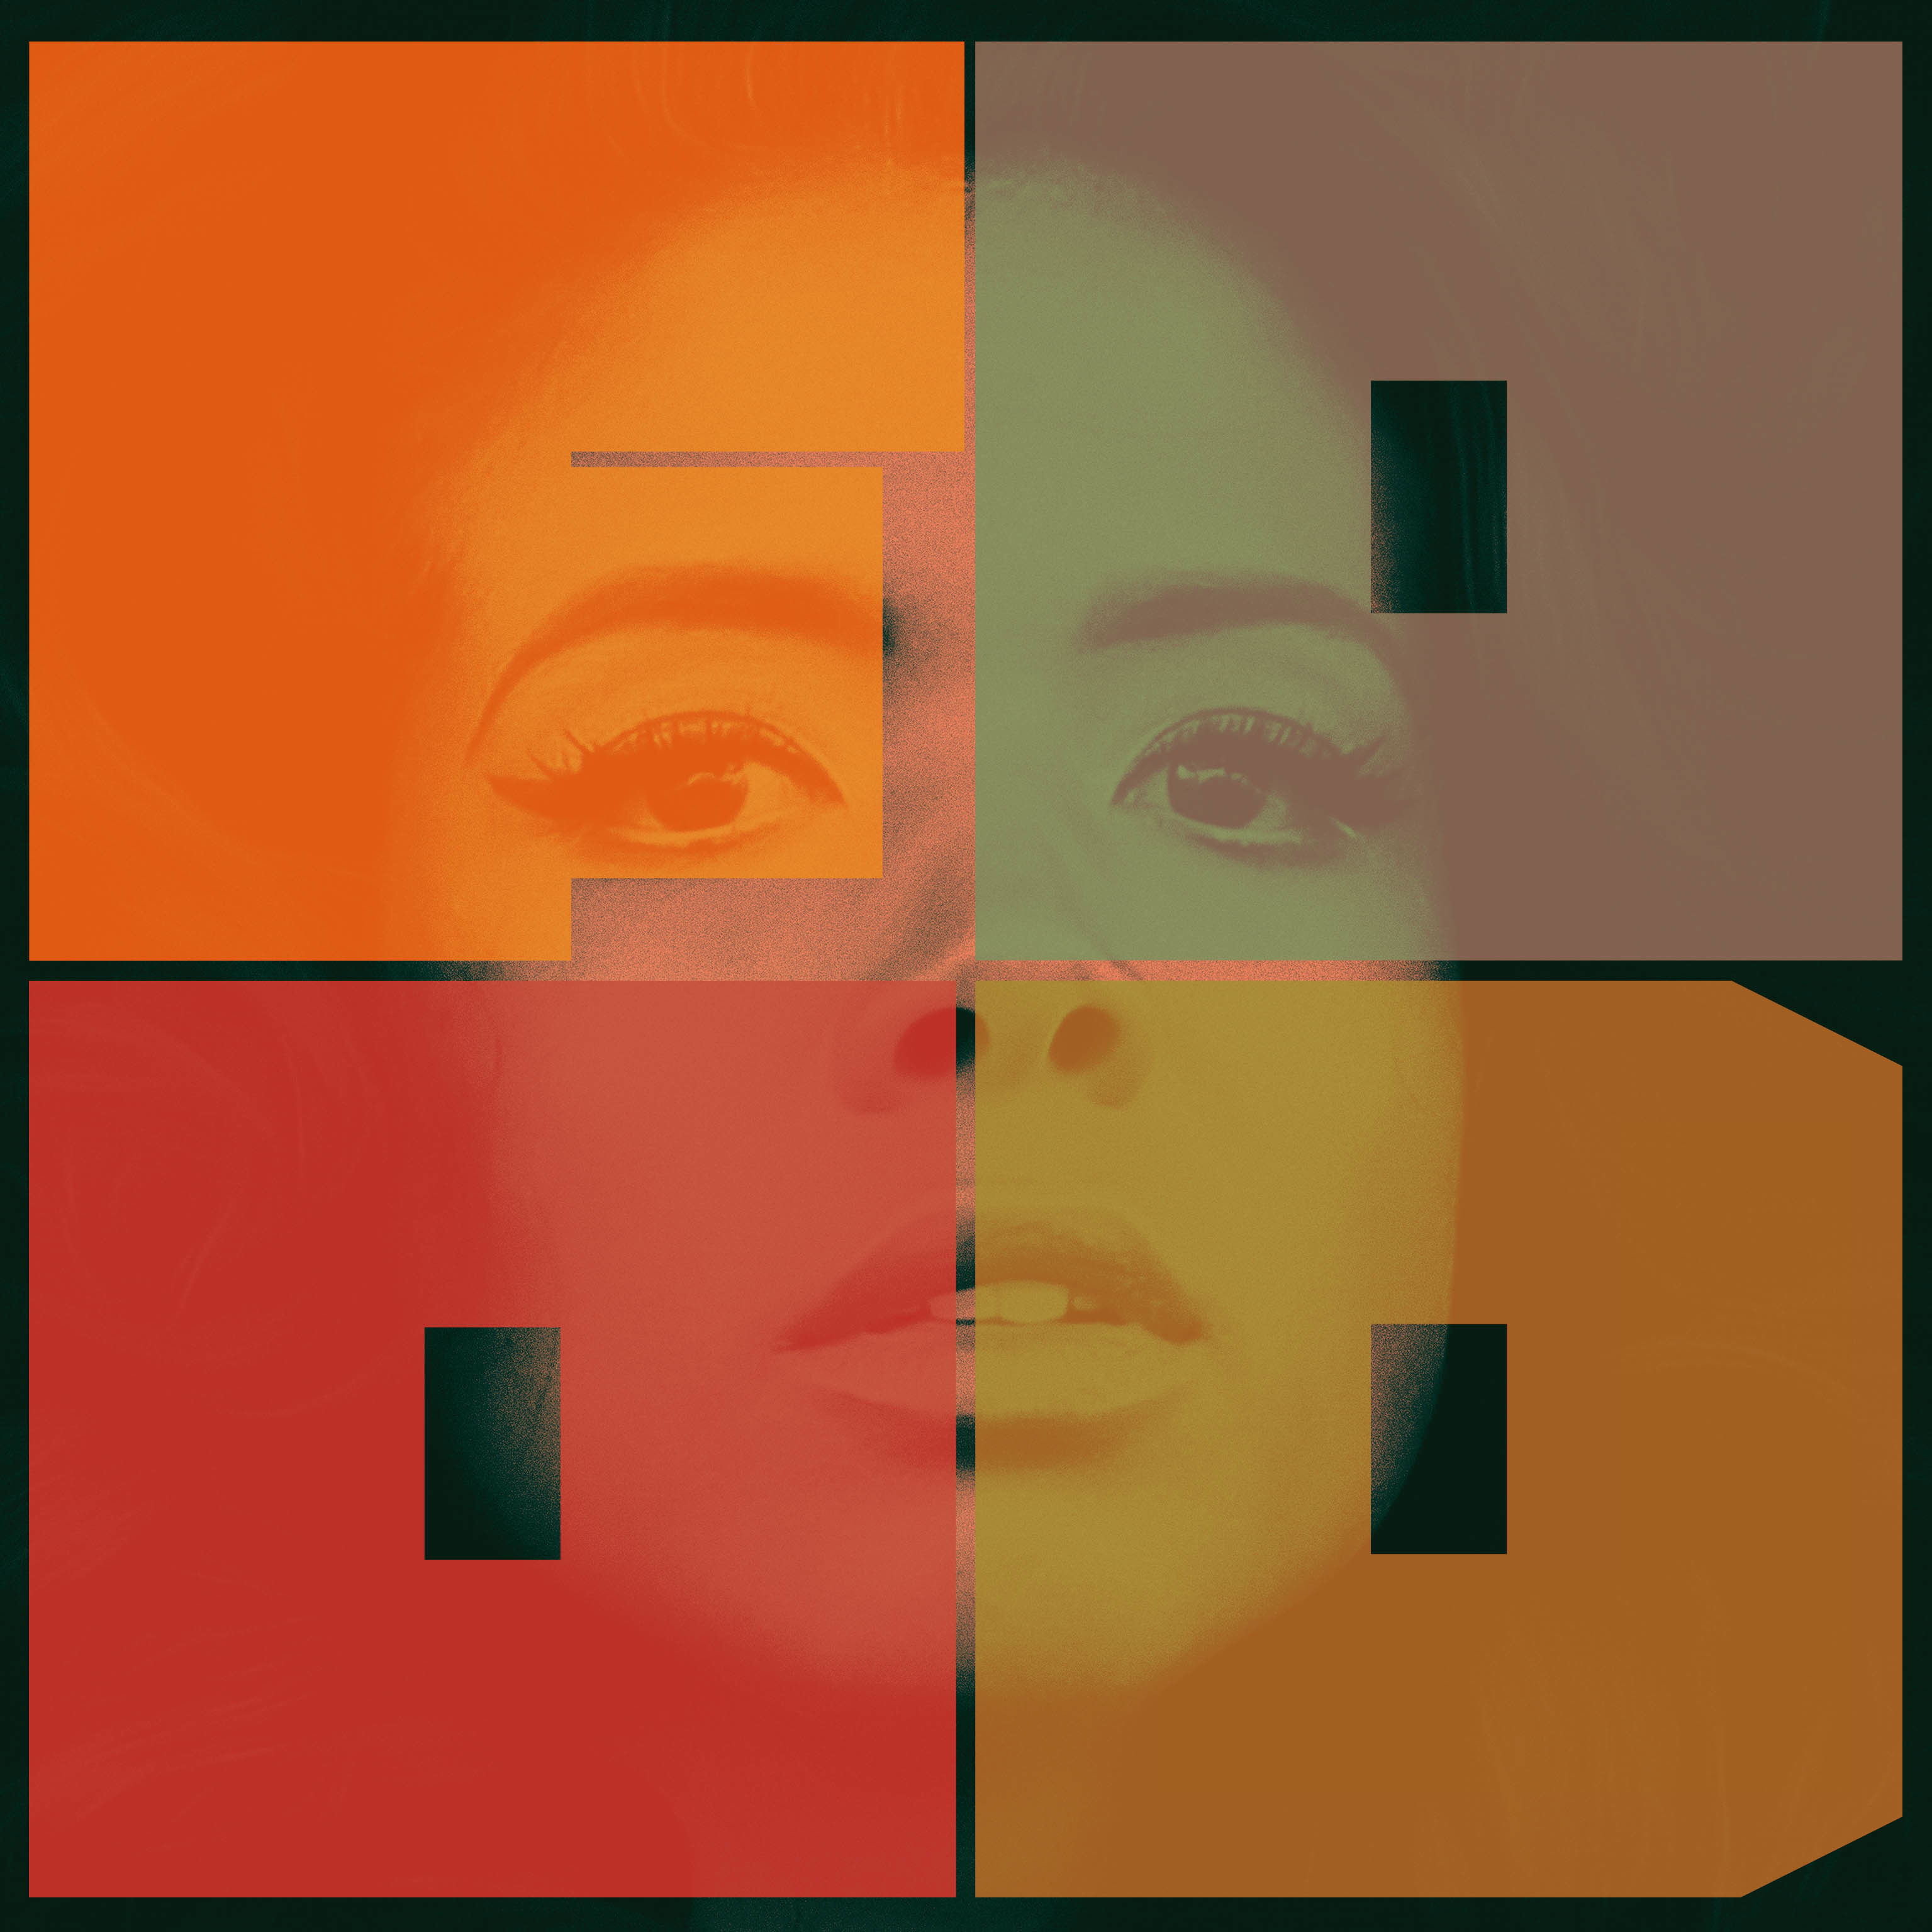 Kelis - Food (for Indie stores only) - 2xCD